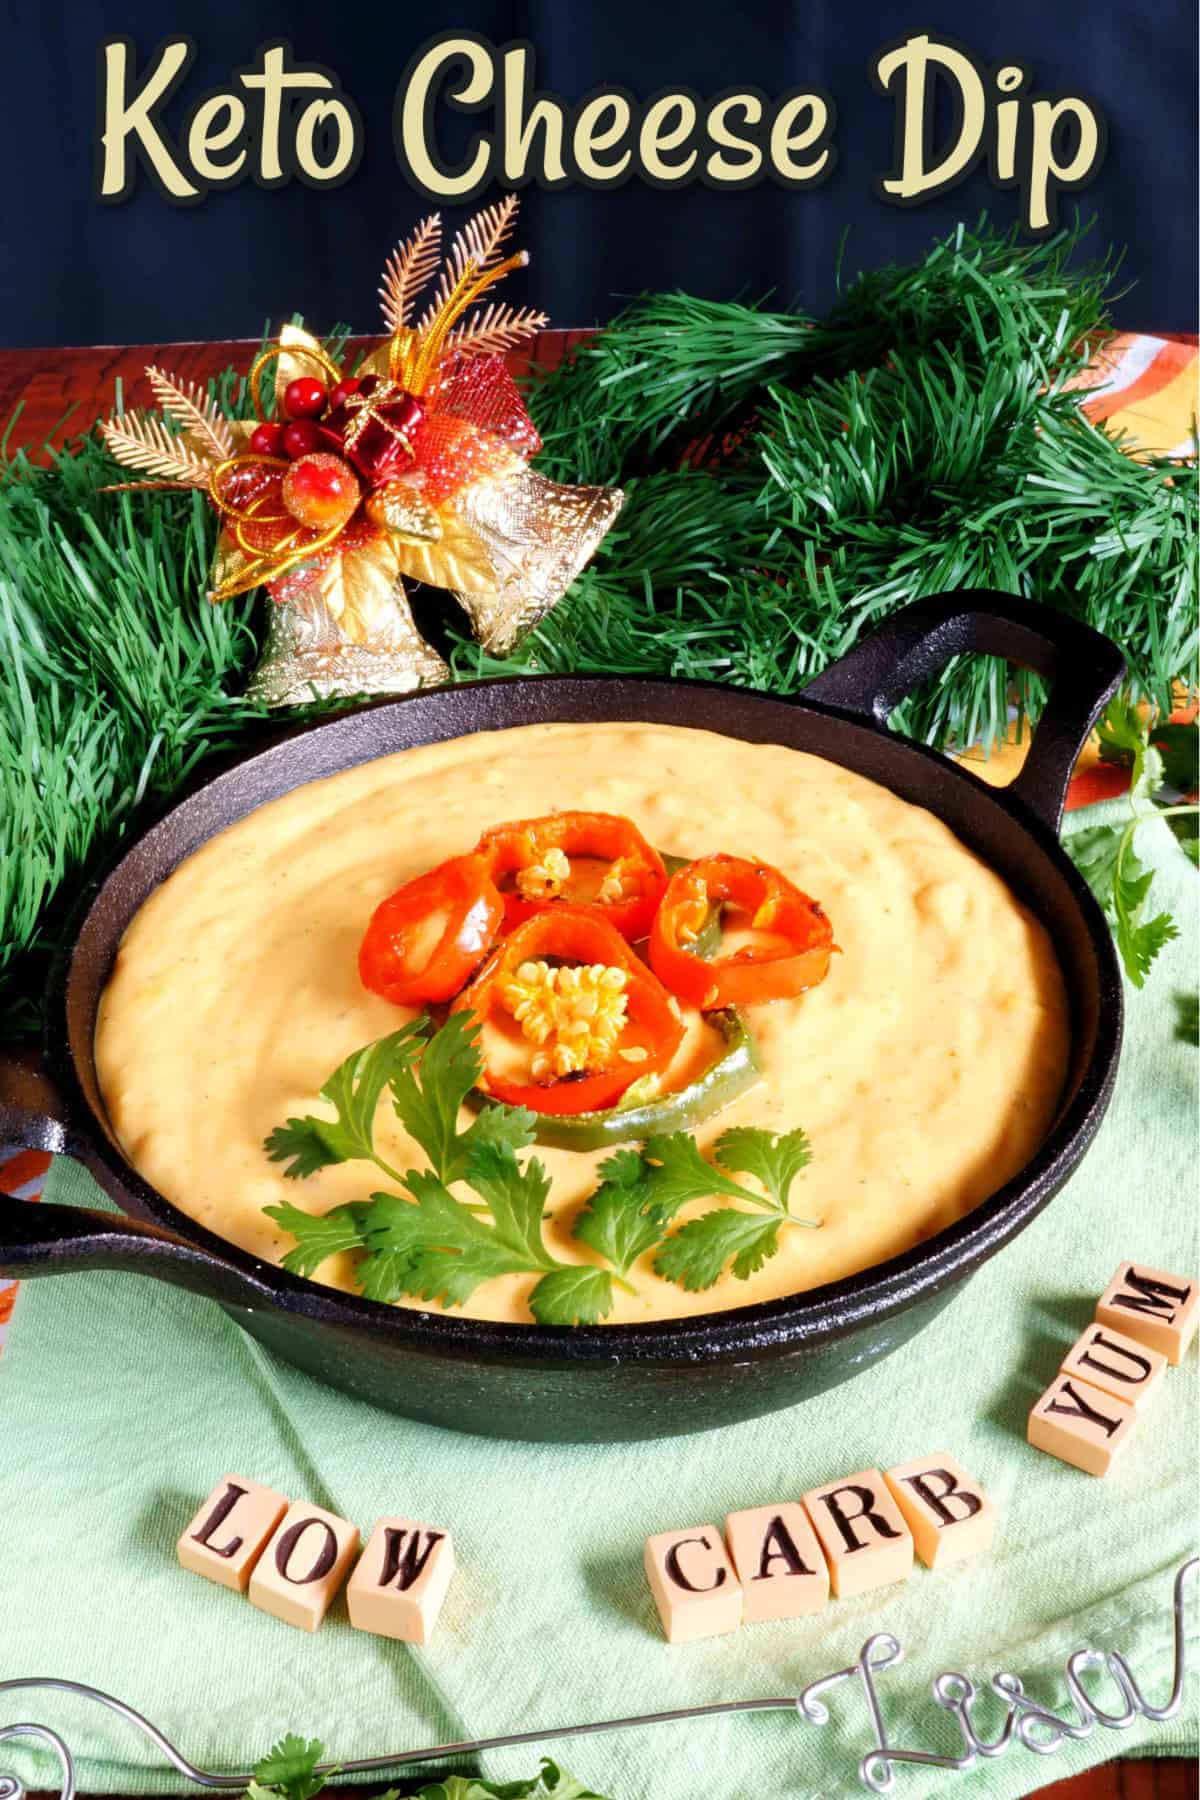 queso keto cheese dip cover image